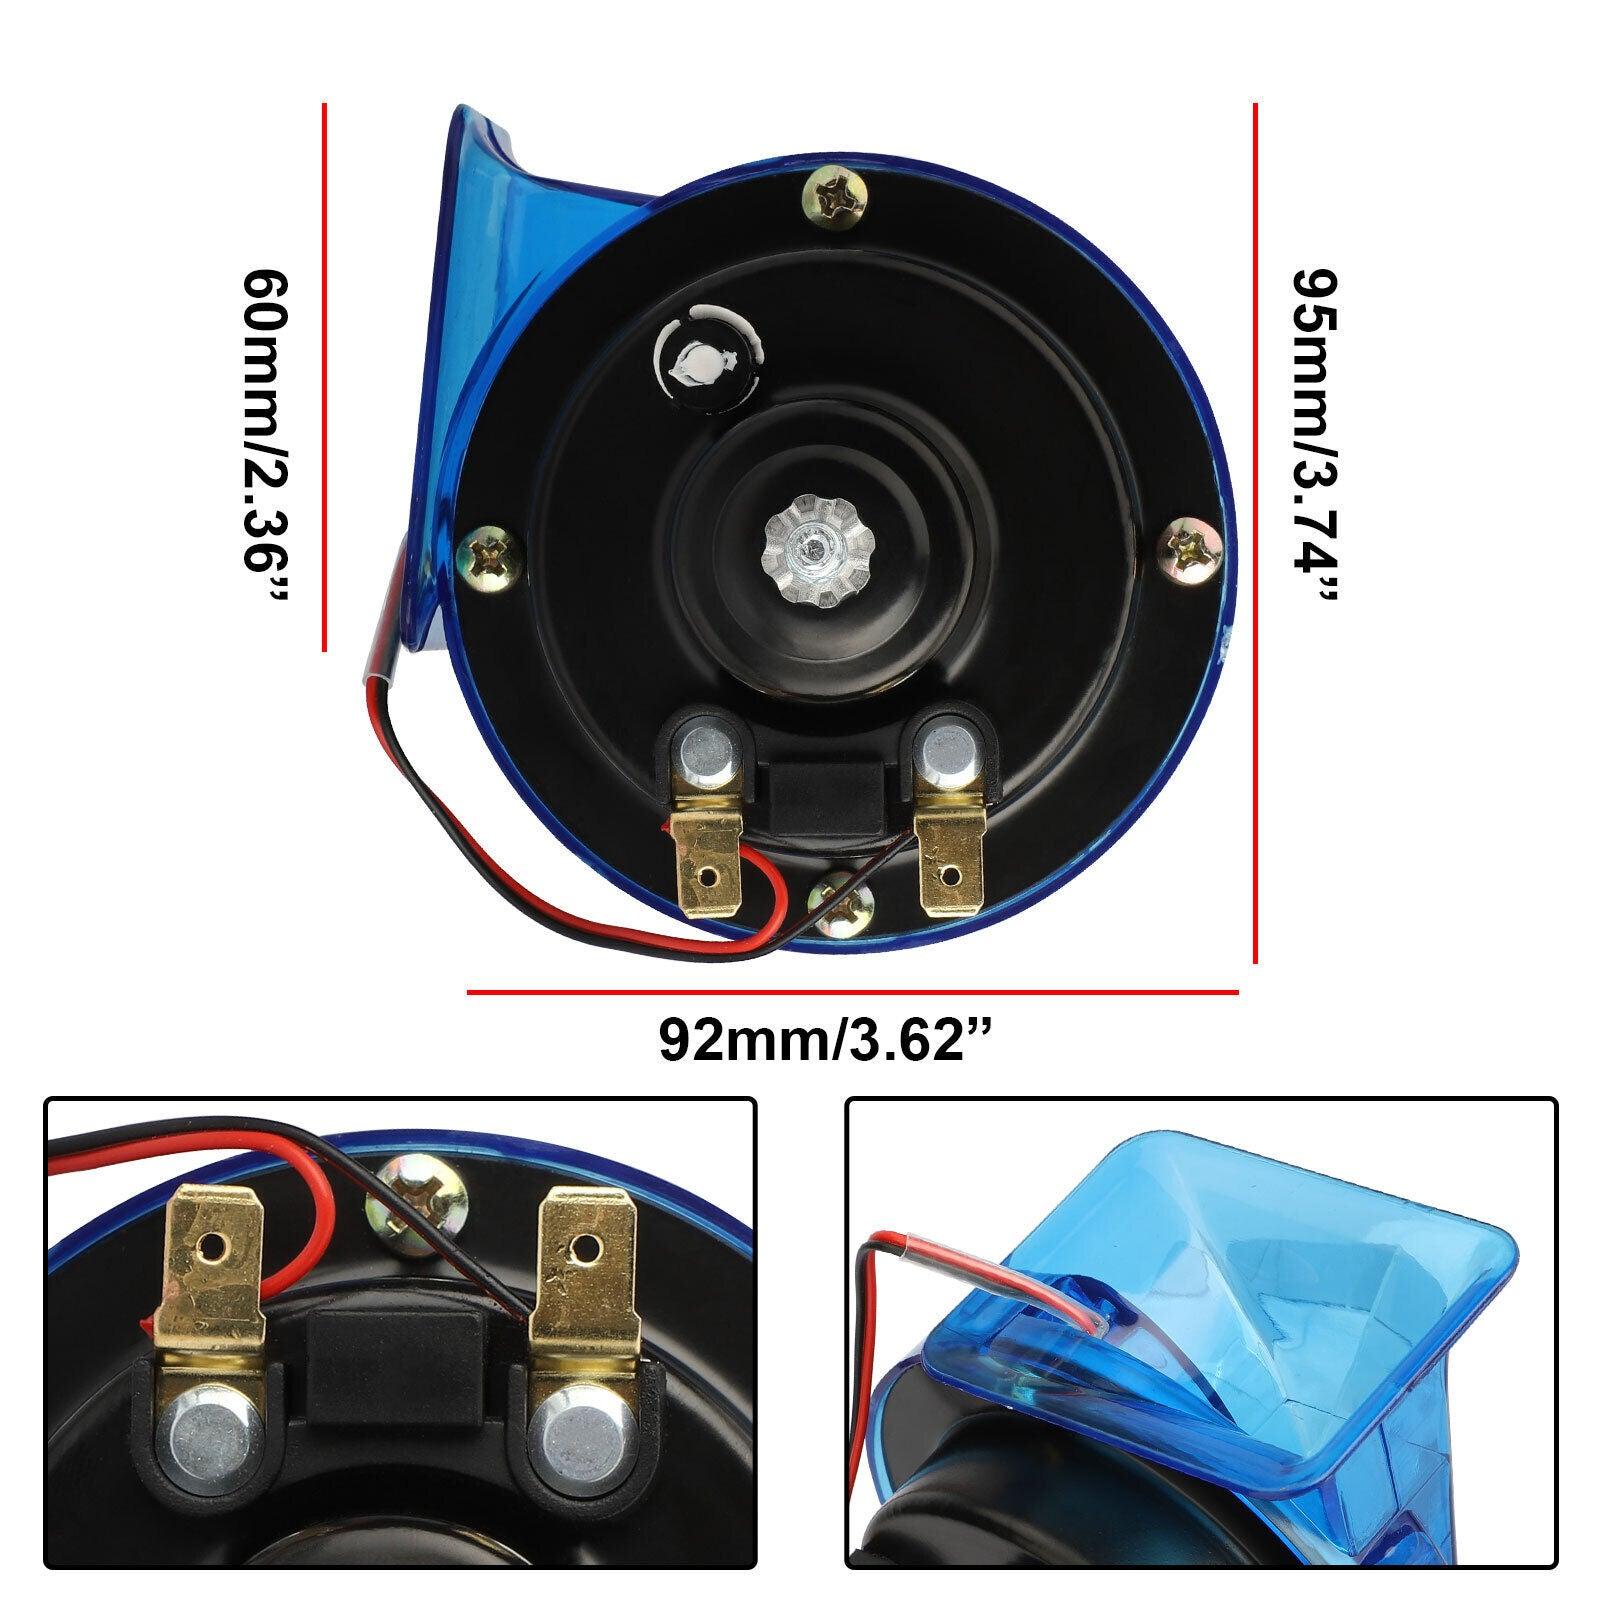 115DB 12V Super Loud Electric Train Snail Air Horn For Motorcycle Car Truck Boat - KinglyDay